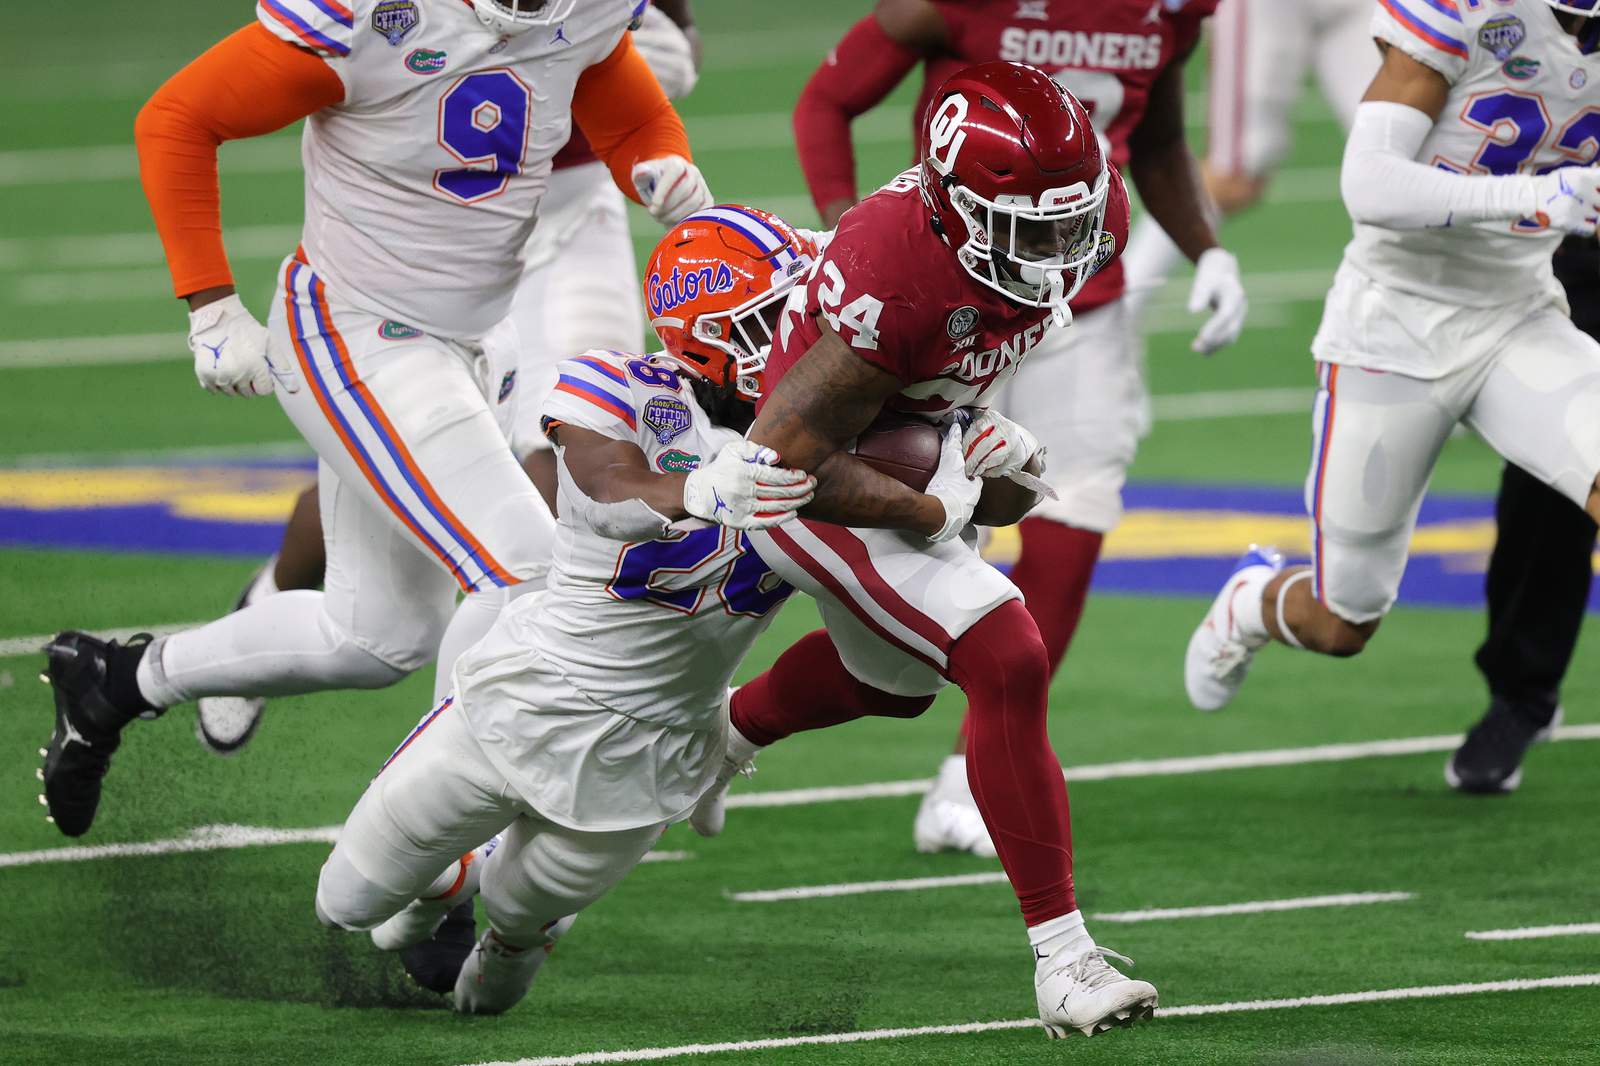 Gators rattled: No. 8 Oklahoma routs Florida in Cotton Bowl